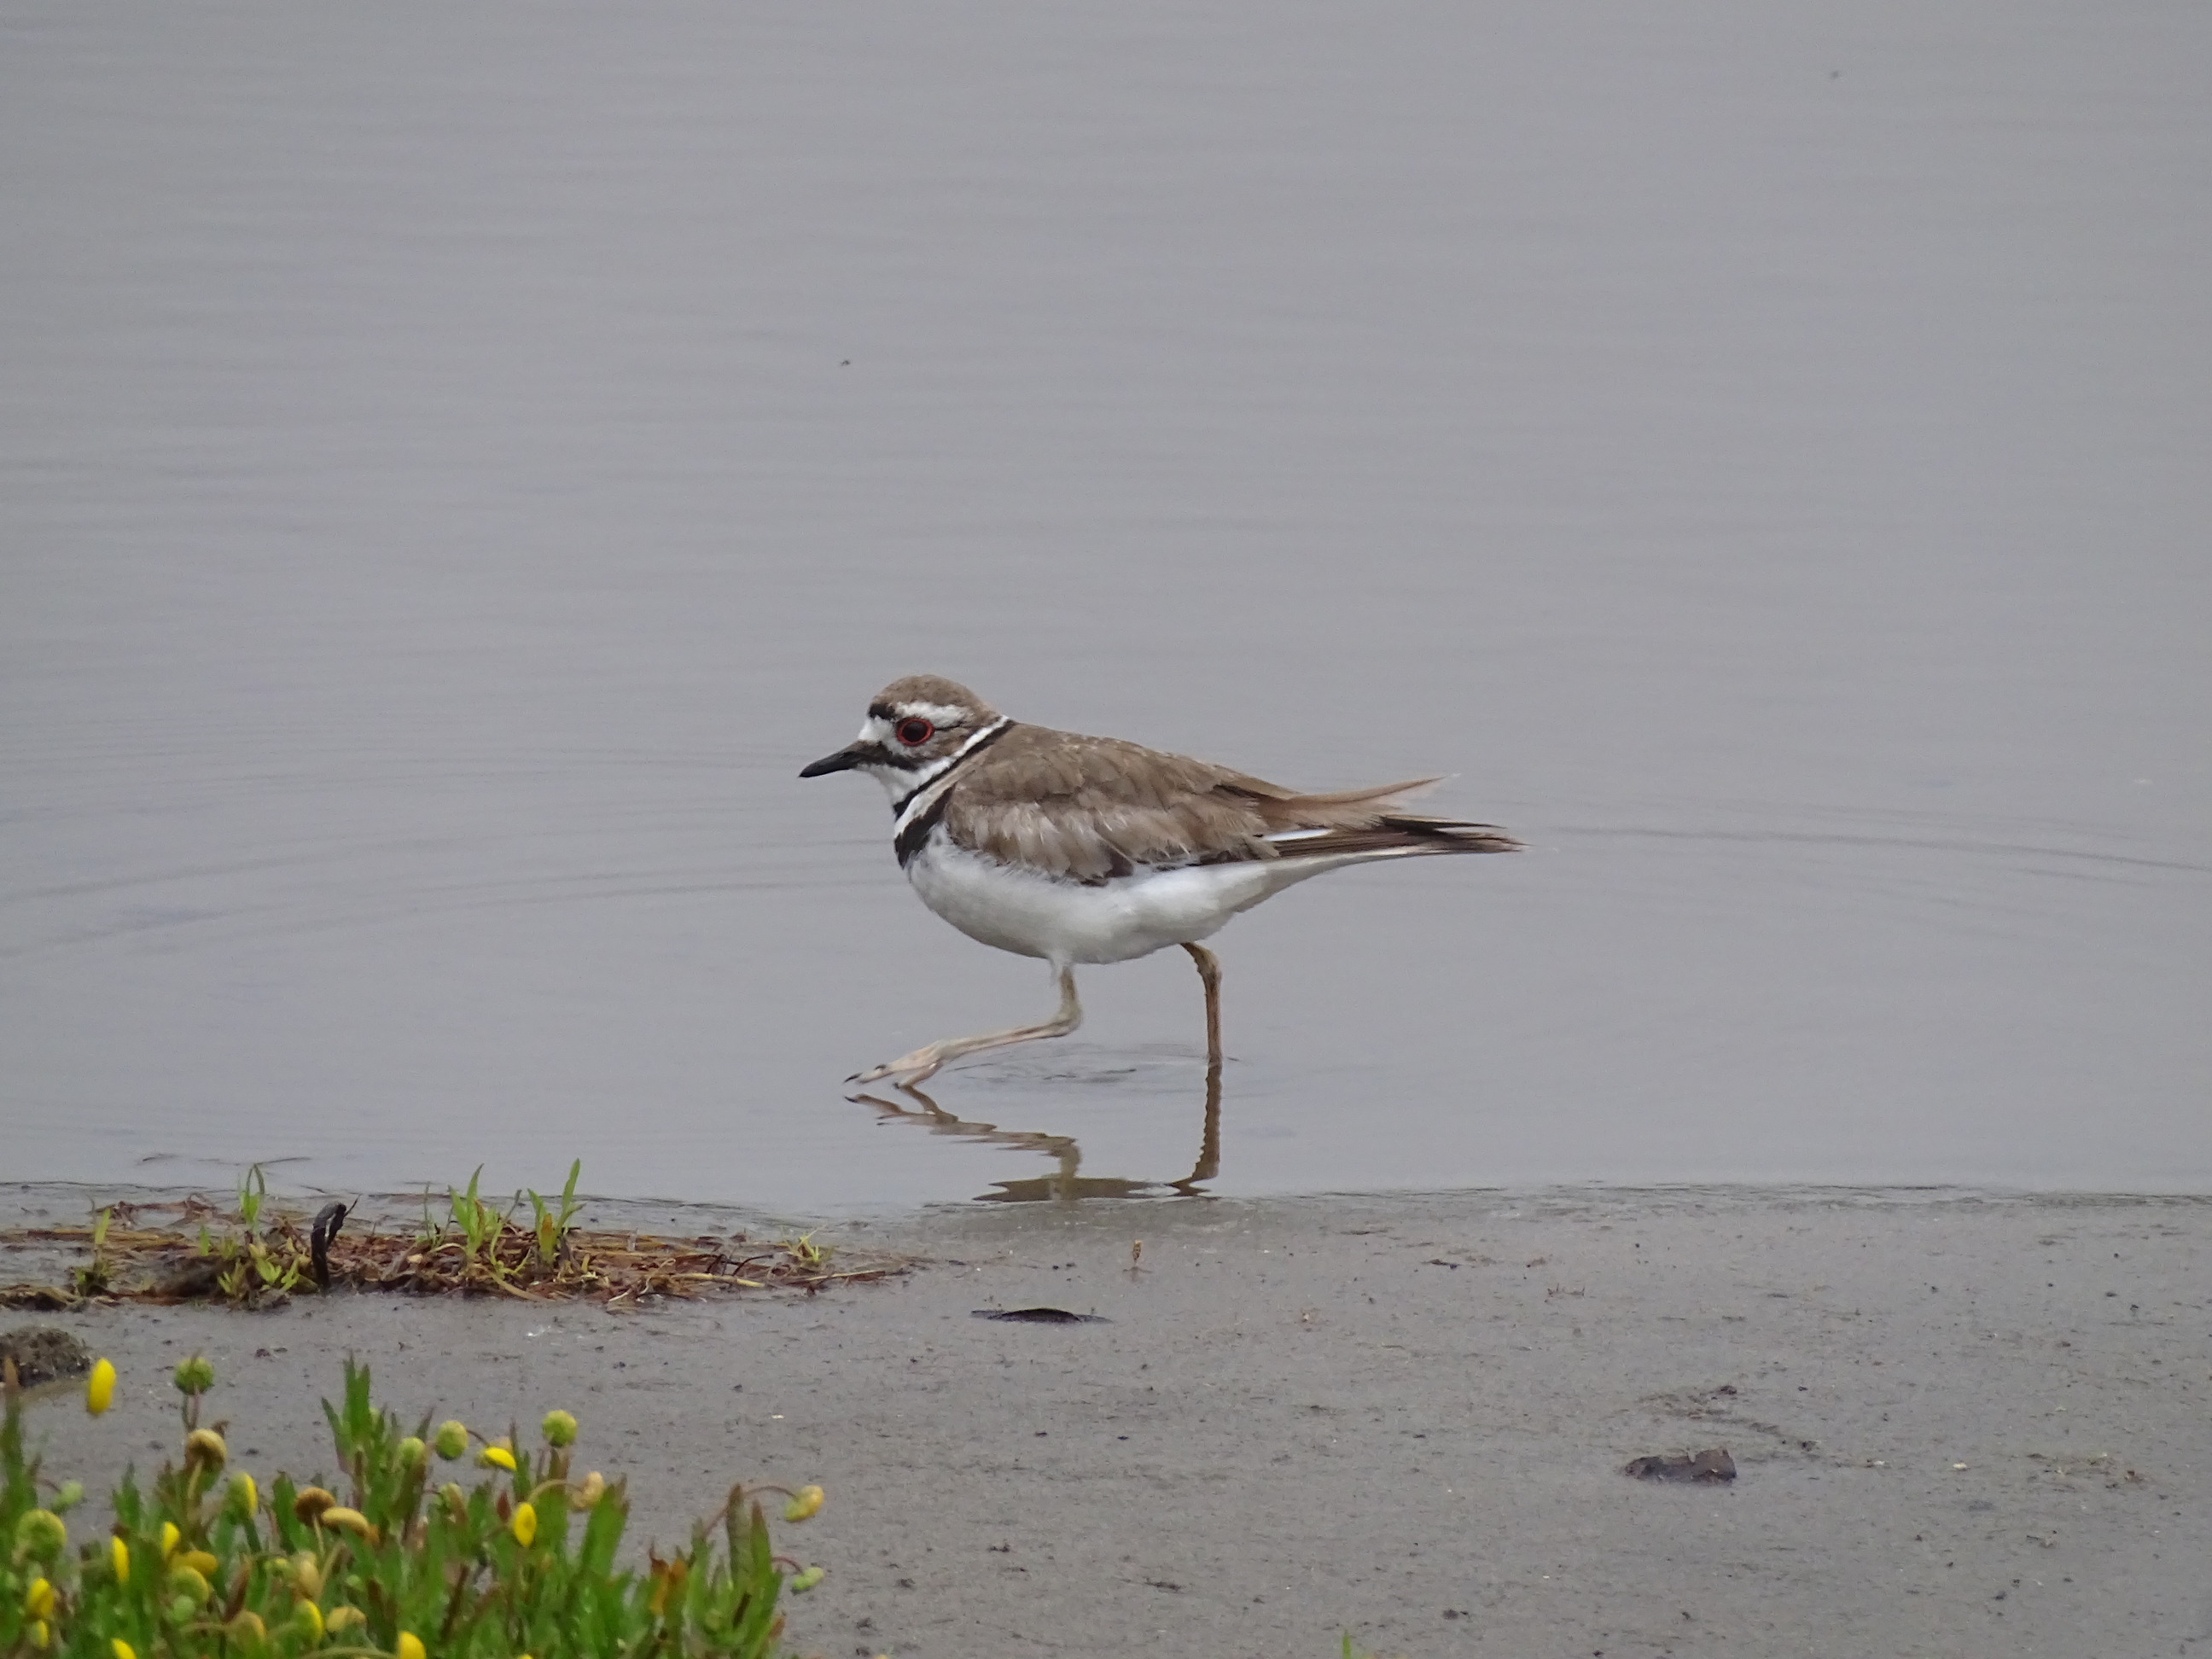 A photo of a small light brown shorebird with a black band around its neck walking in shallow water.